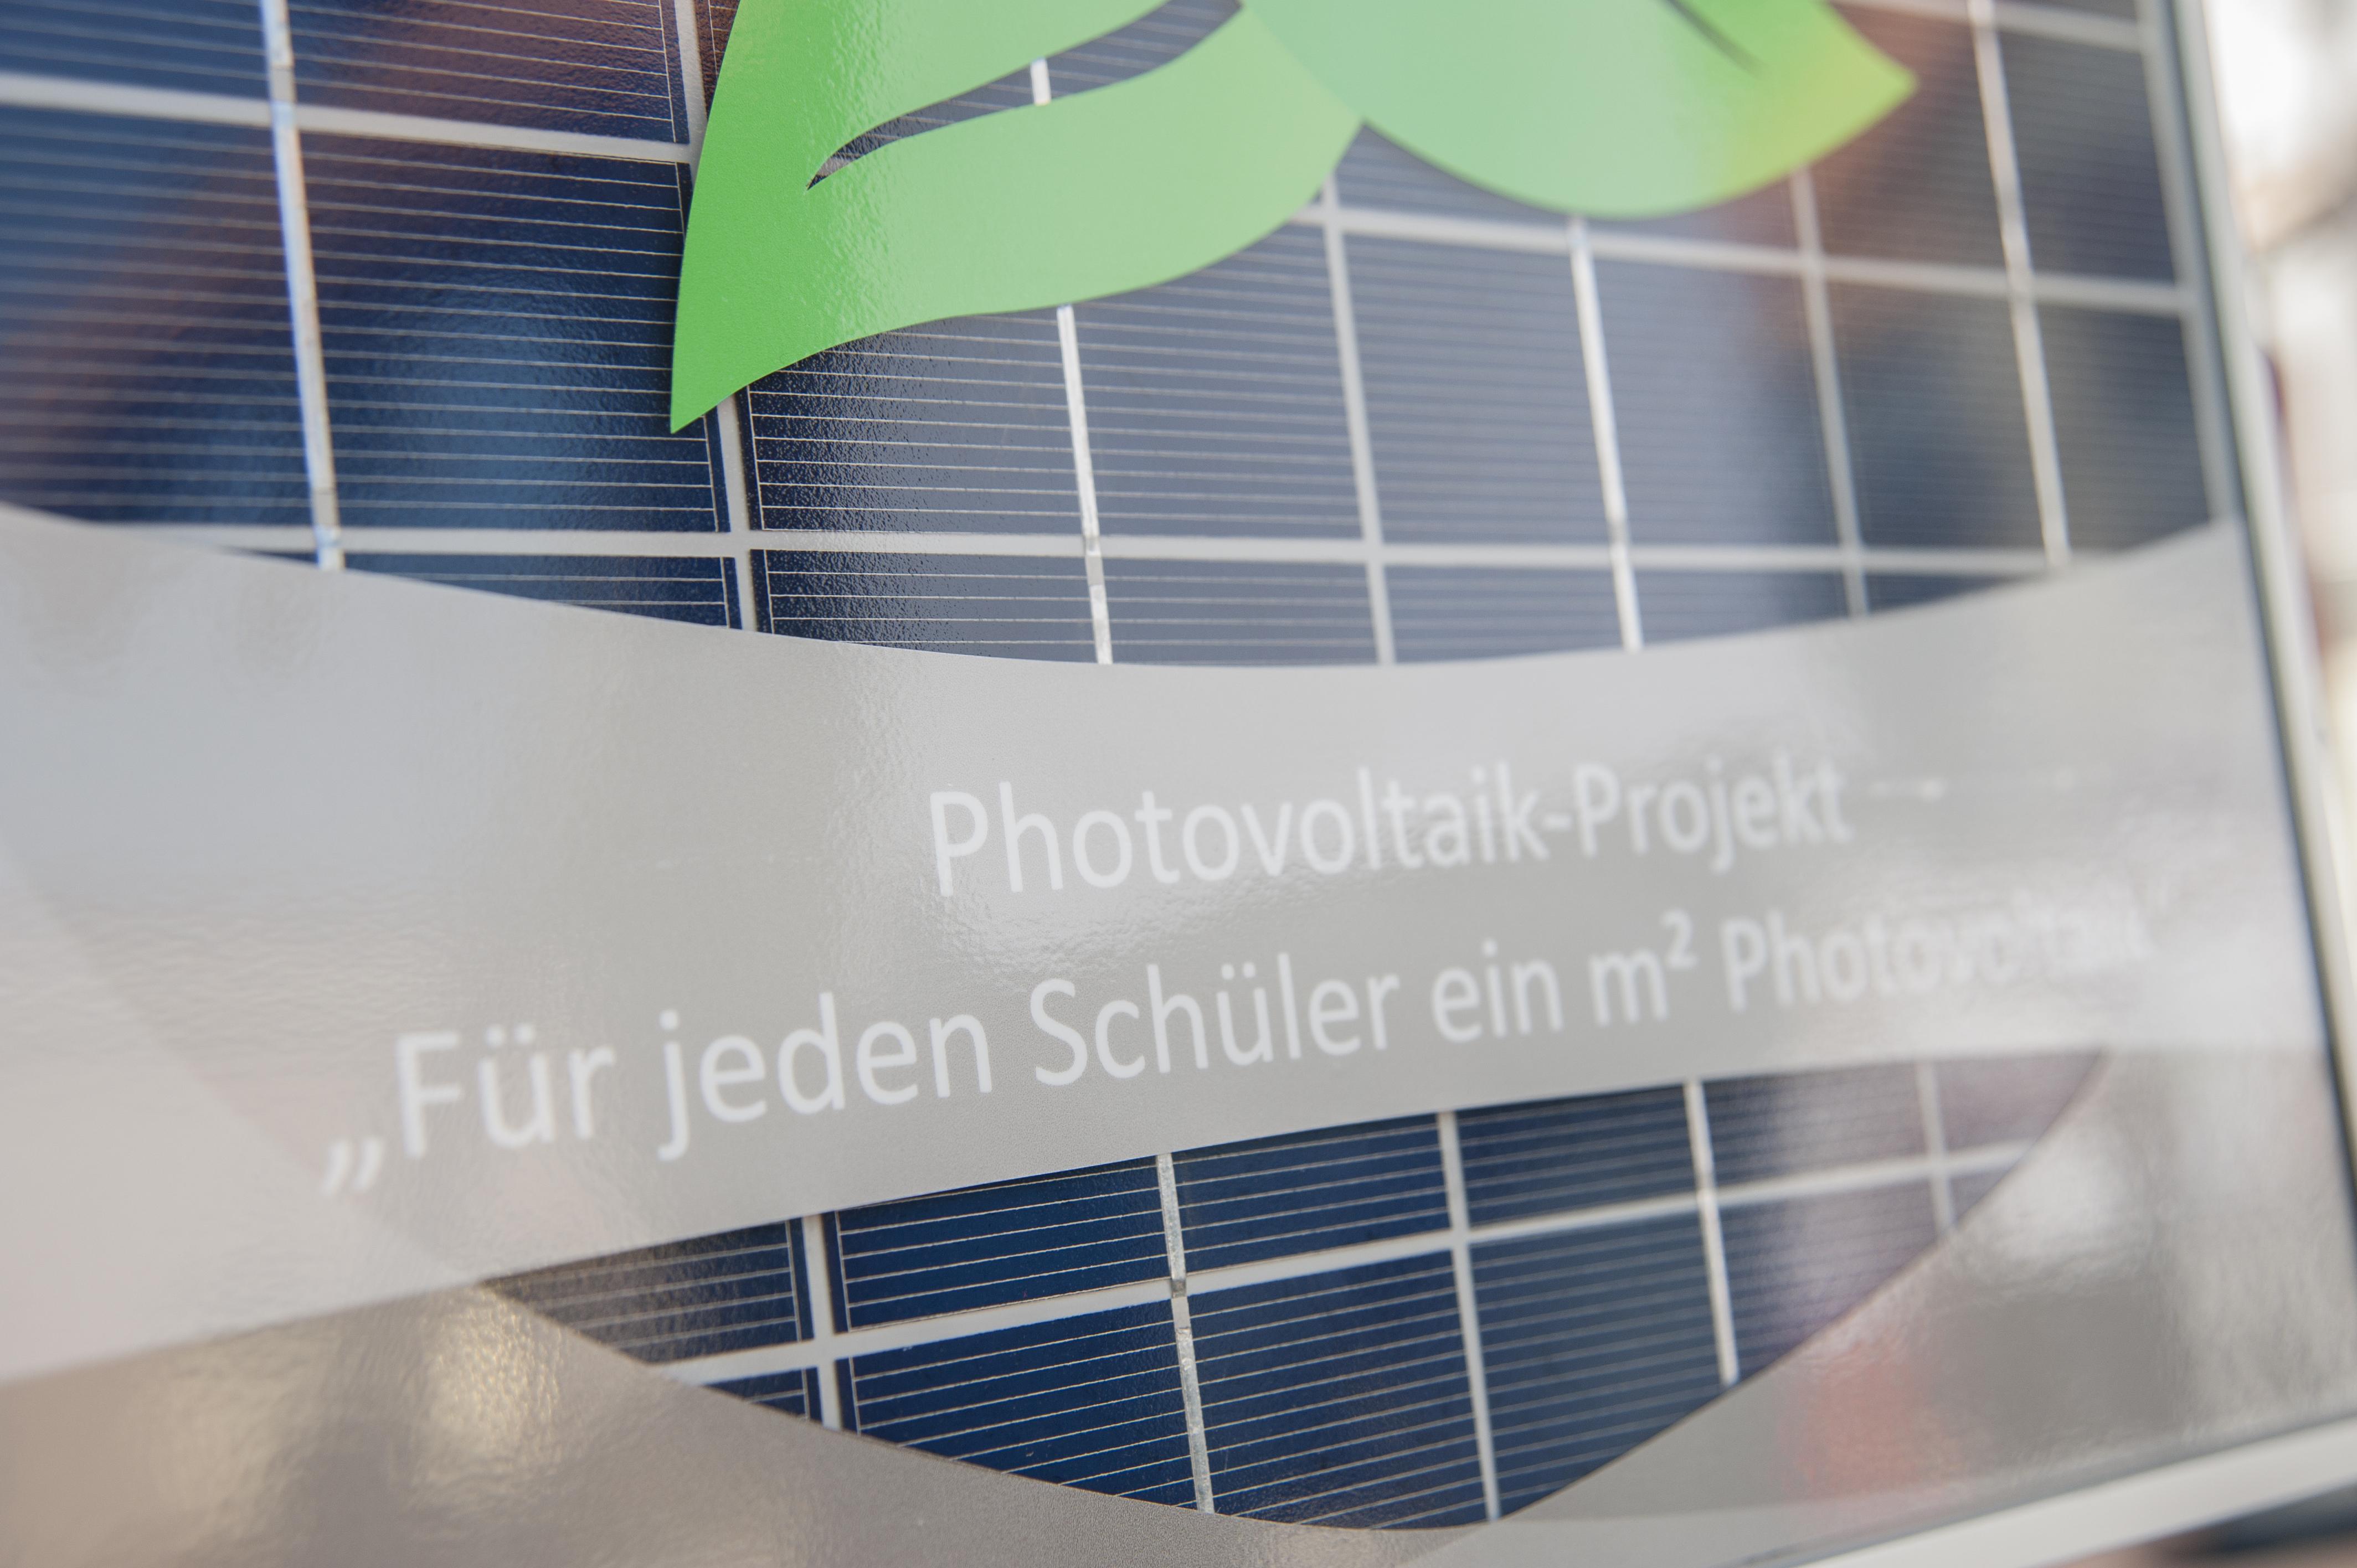 Photovoltaics for a green future